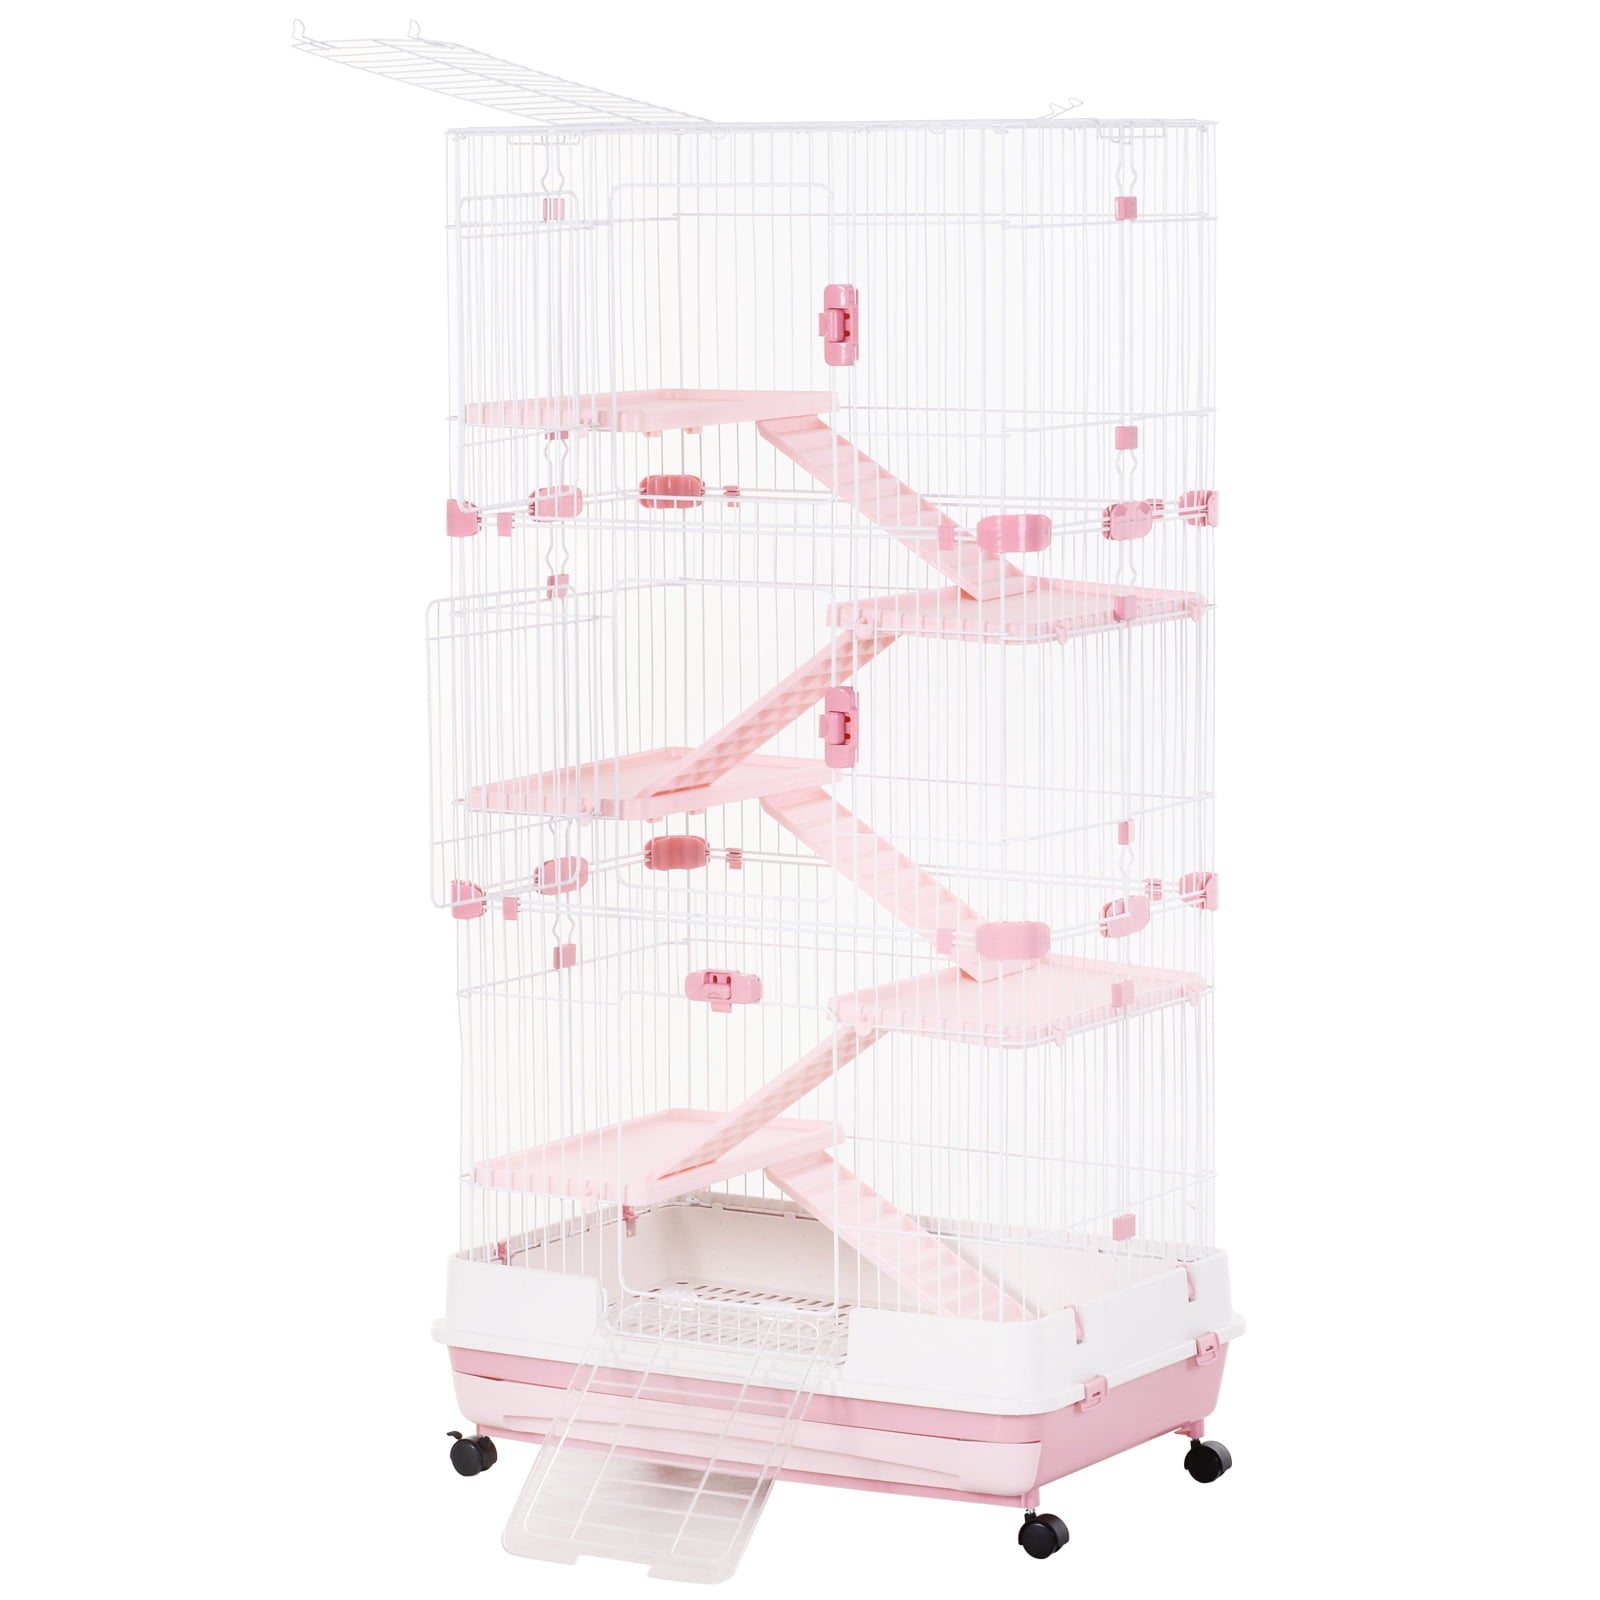 Carevas 6-level Cage Indoor Small Animal Hutch - Pink / White